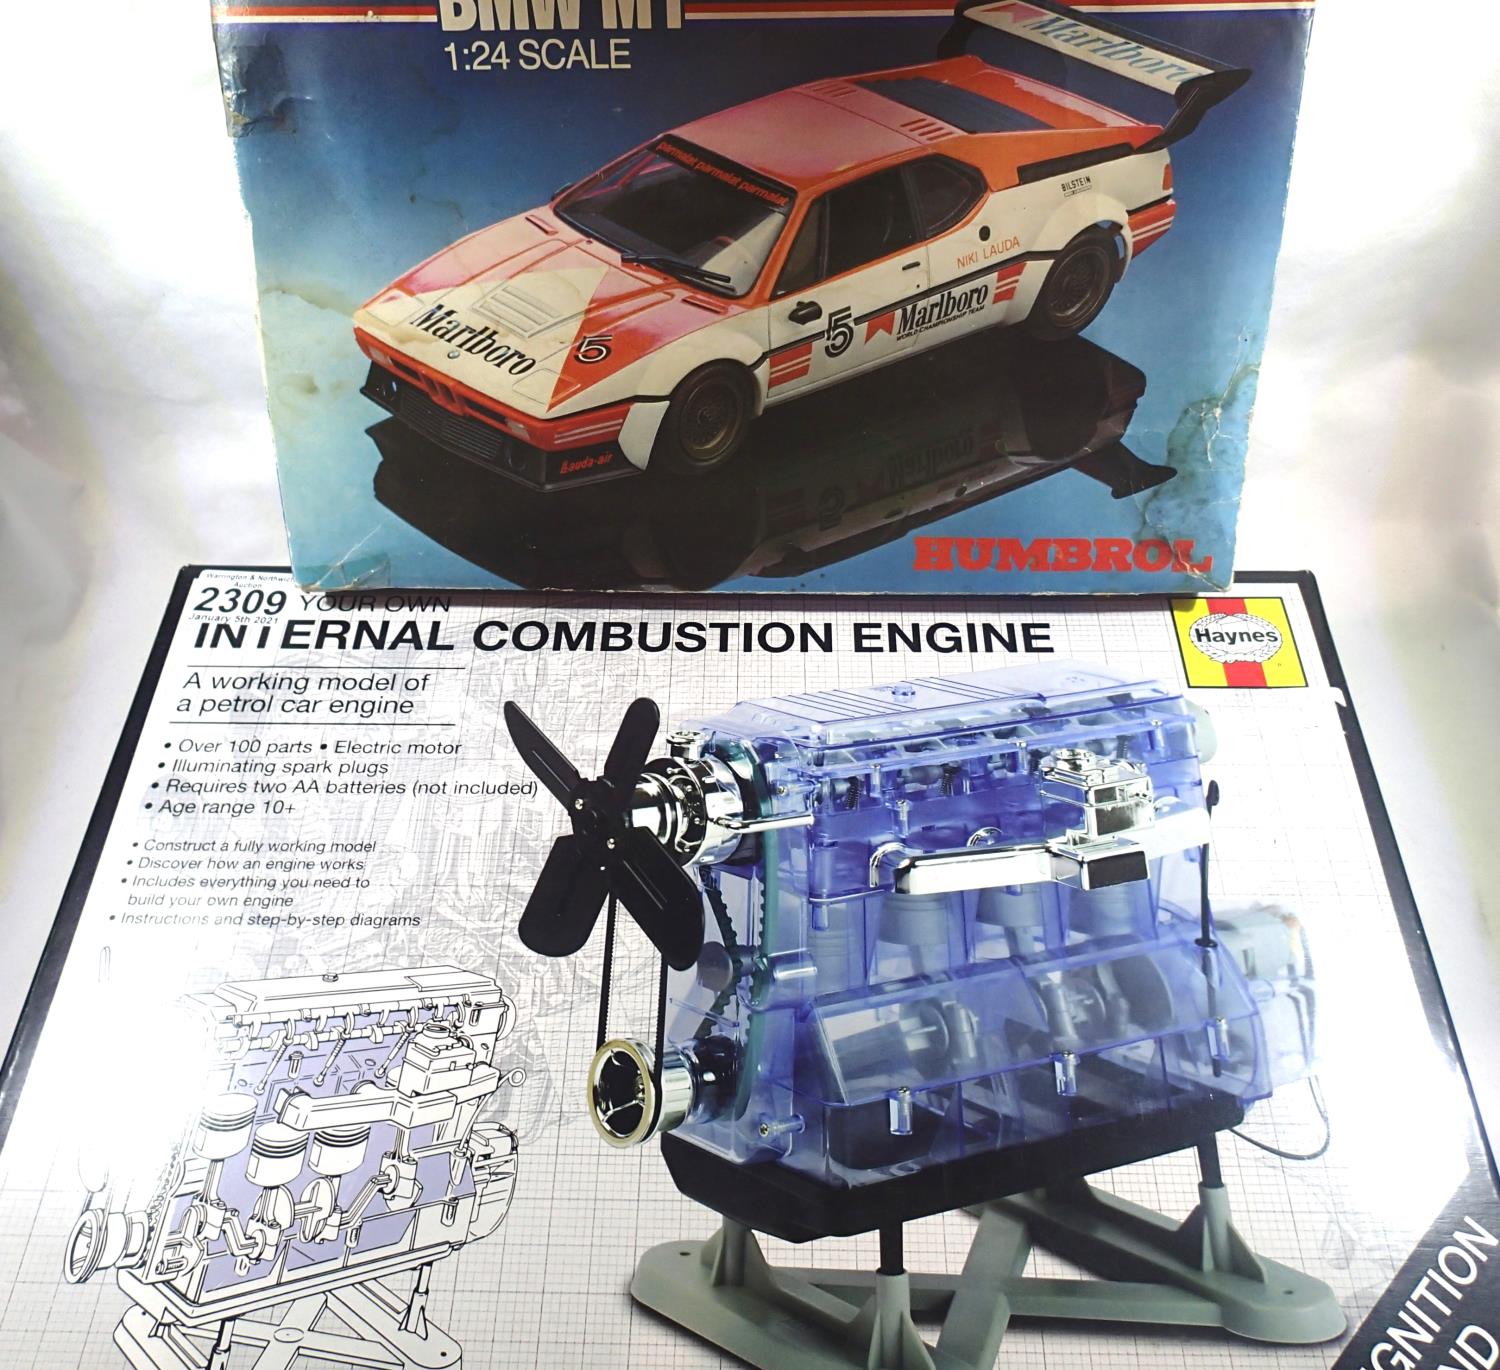 Haynes car petrol engine with ignition sound, motorised and 1/24 scale BMW M1. P&P Group 3 (£25+